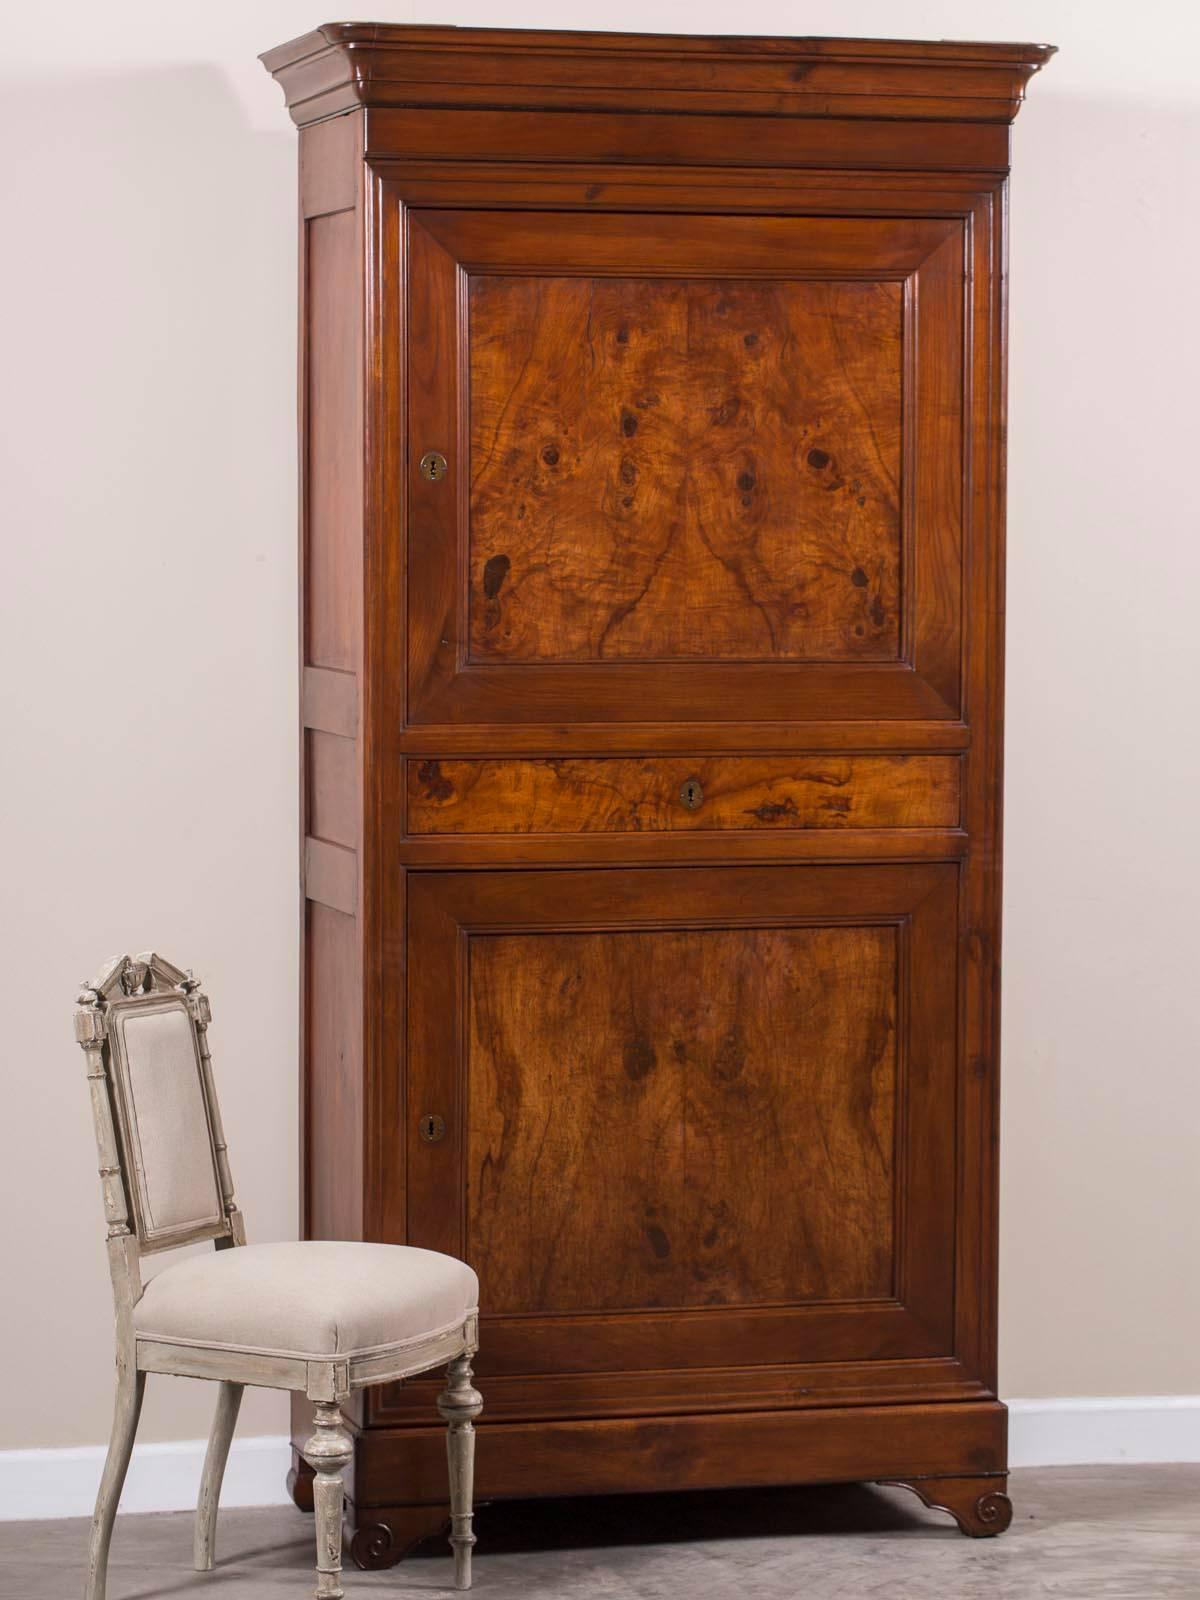 Be the first to see our new arrivals directly through 1stdibs! Please click follow dealer below. 

This beautiful antique French Louis Philippe cabinet armoire from France circa 1870 is known as an 